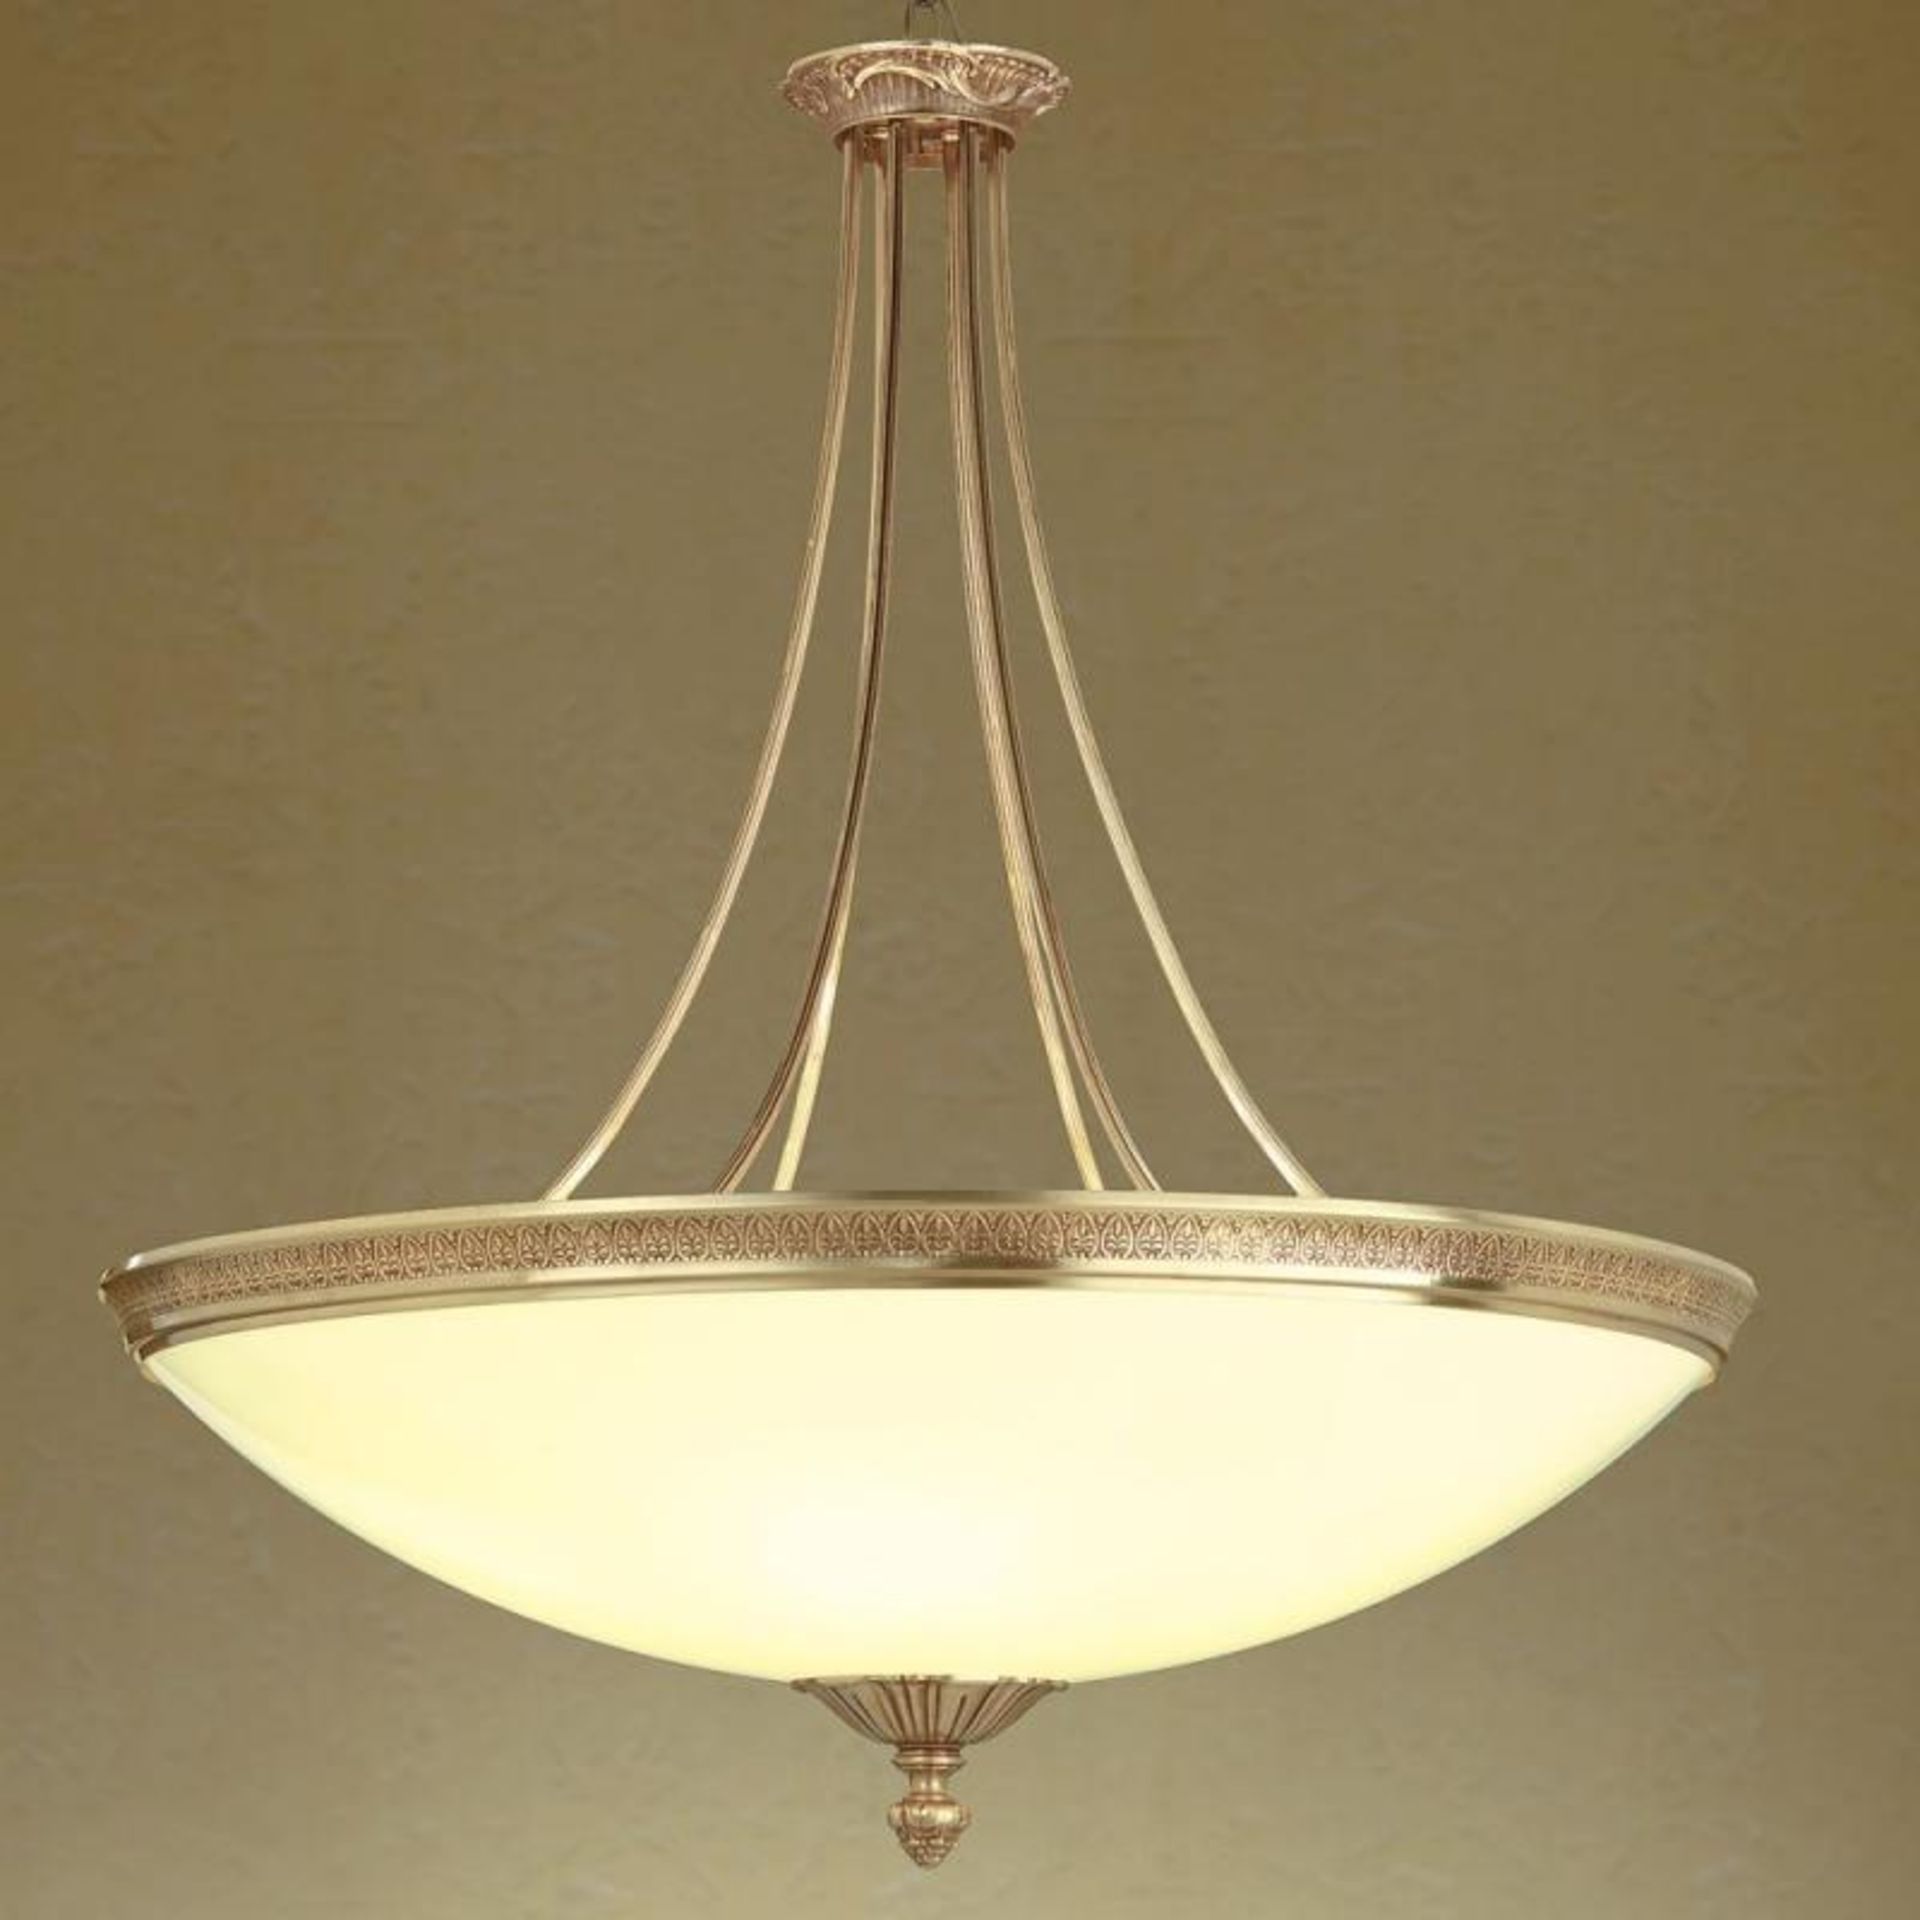 1 x Chelsom SIENA Large Ornate Pendant Ceiling Light Fitting Finished In French Gold With Ivory Diff